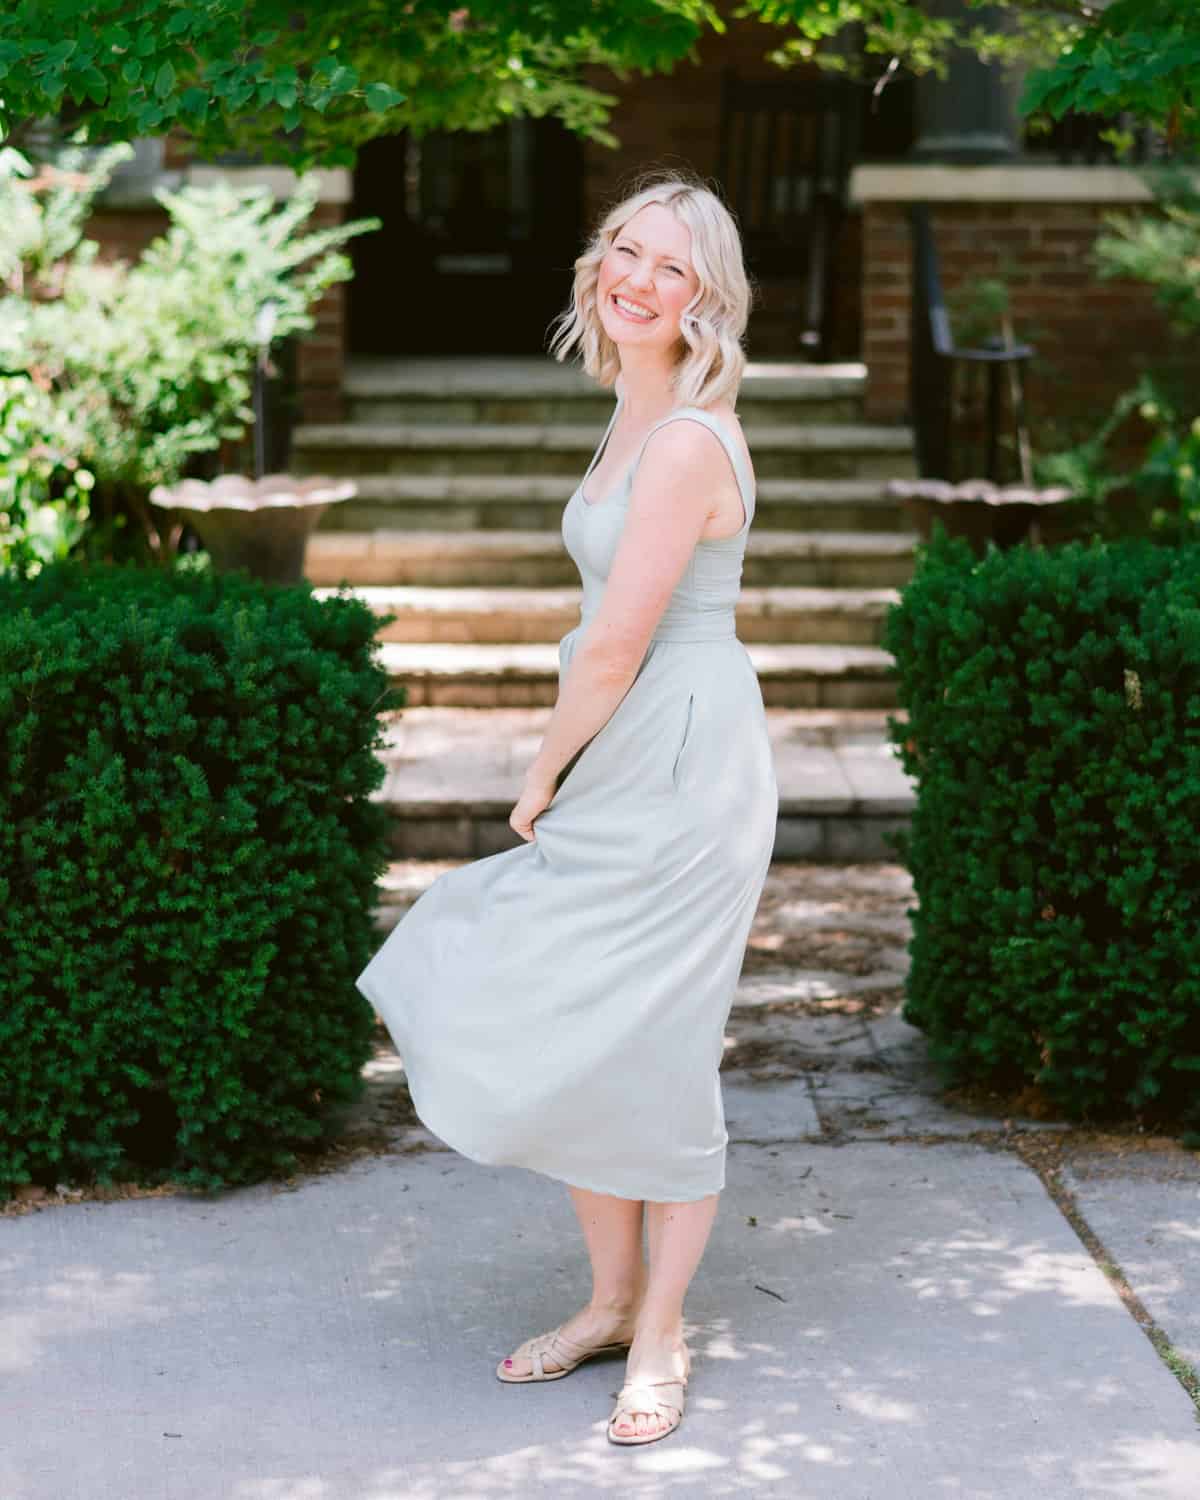 Abbey standing in front of a house, wearing a light gray dress and smiling.